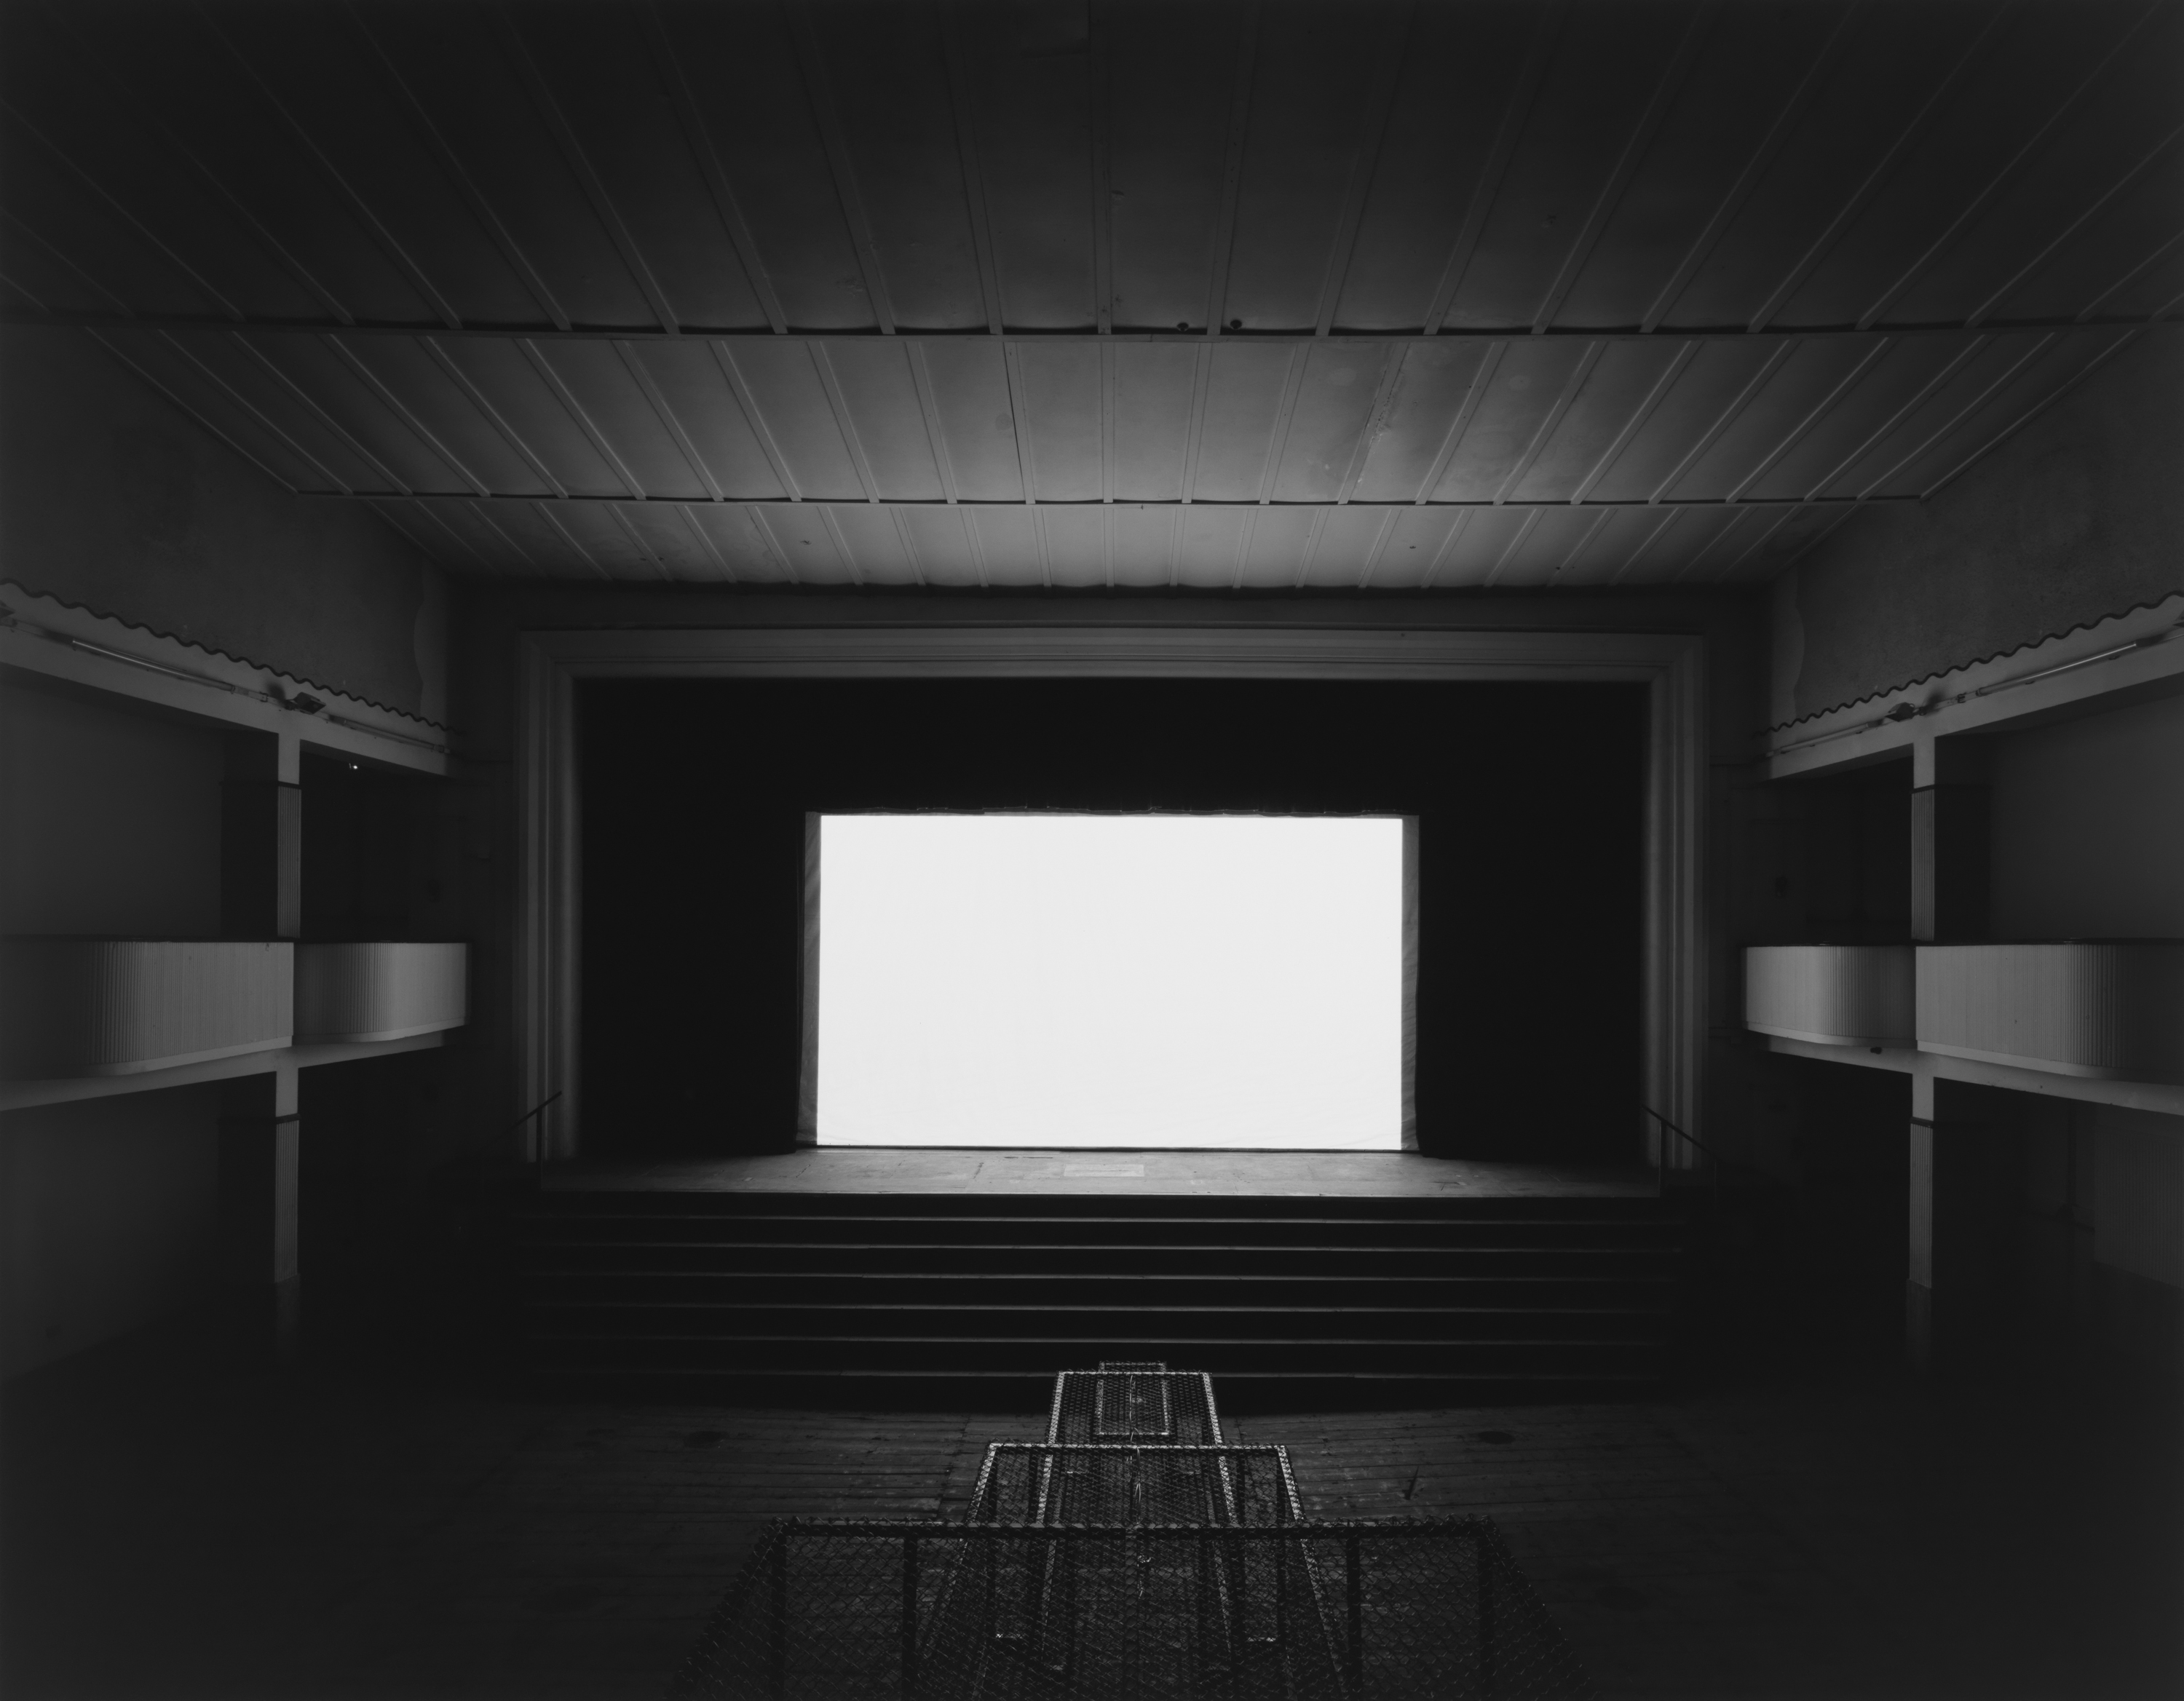 Black and white photograph of an empty theater with a blank white screen illuminating the space